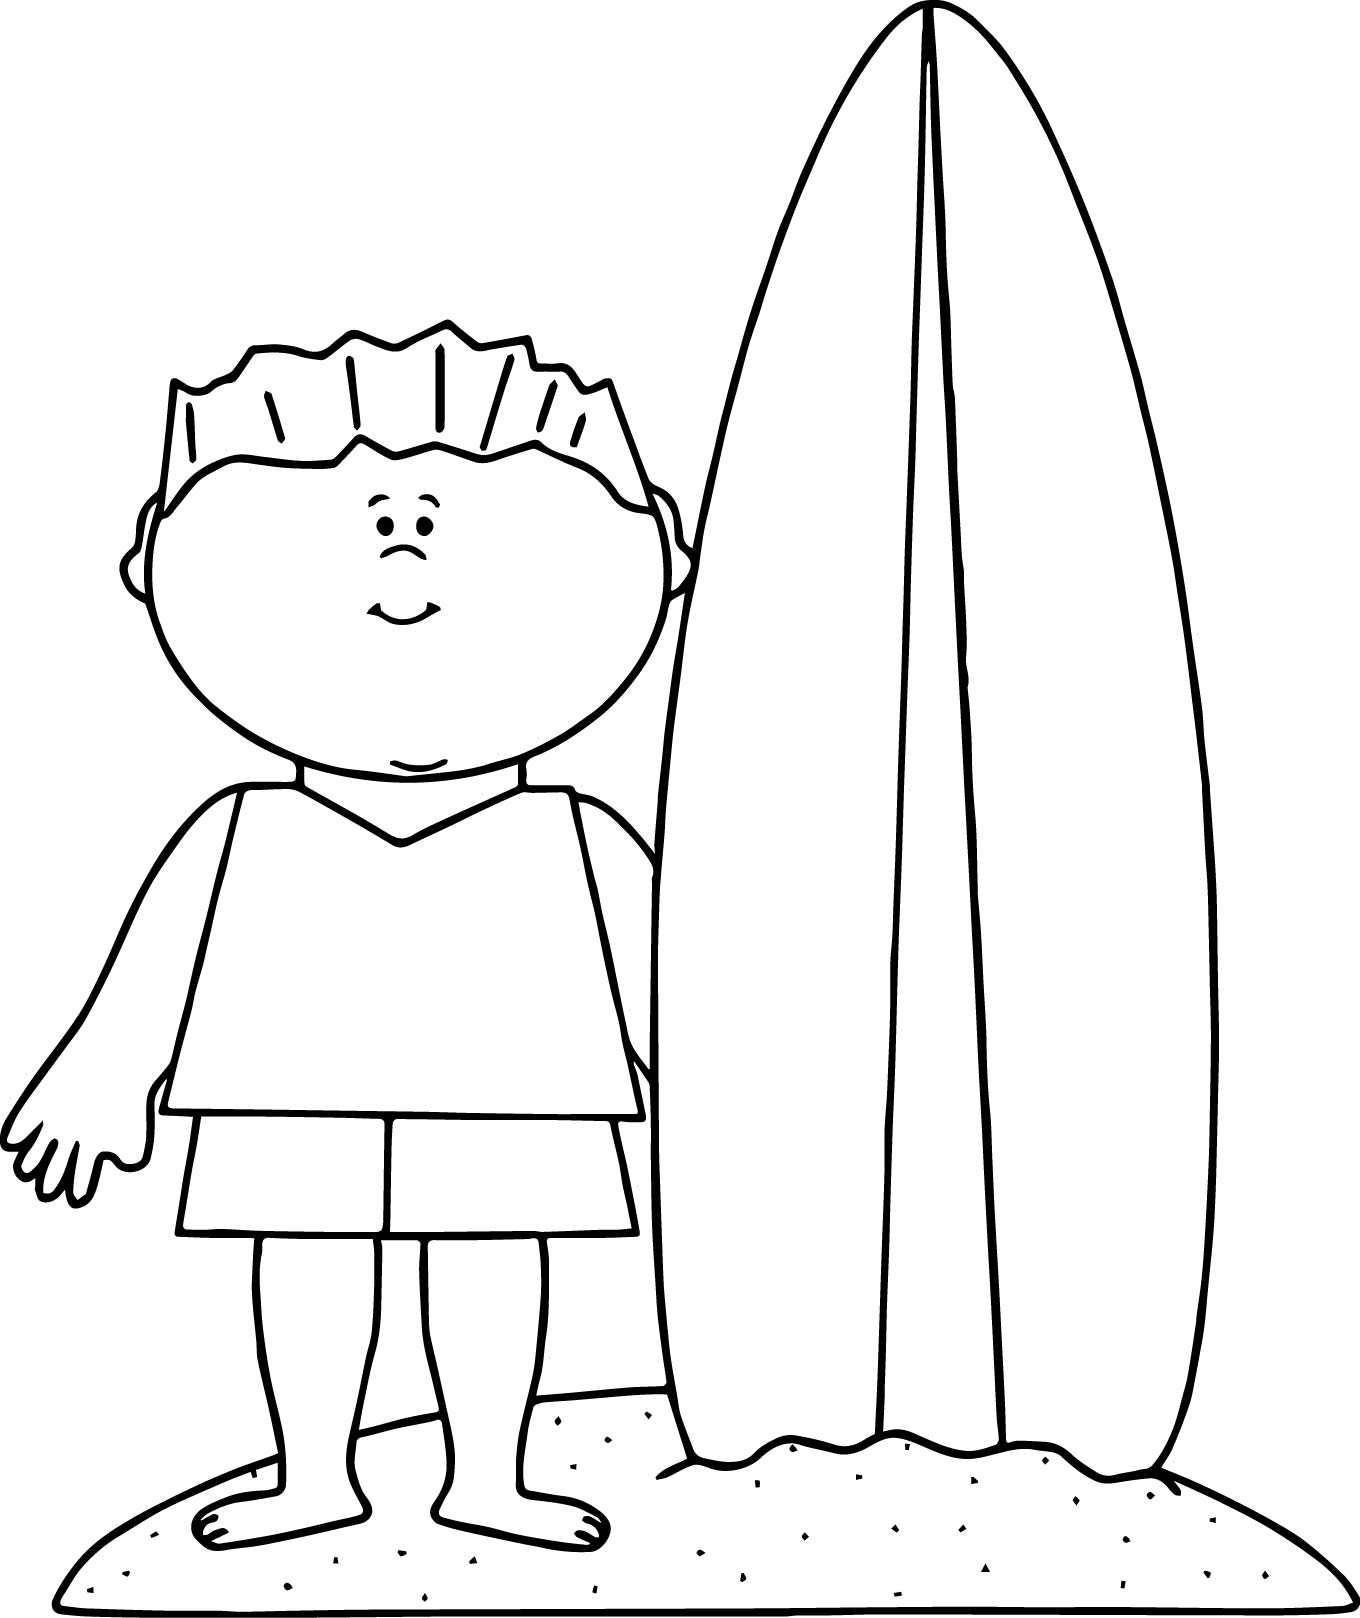 surfboard-coloring-page-at-getcolorings-free-printable-colorings